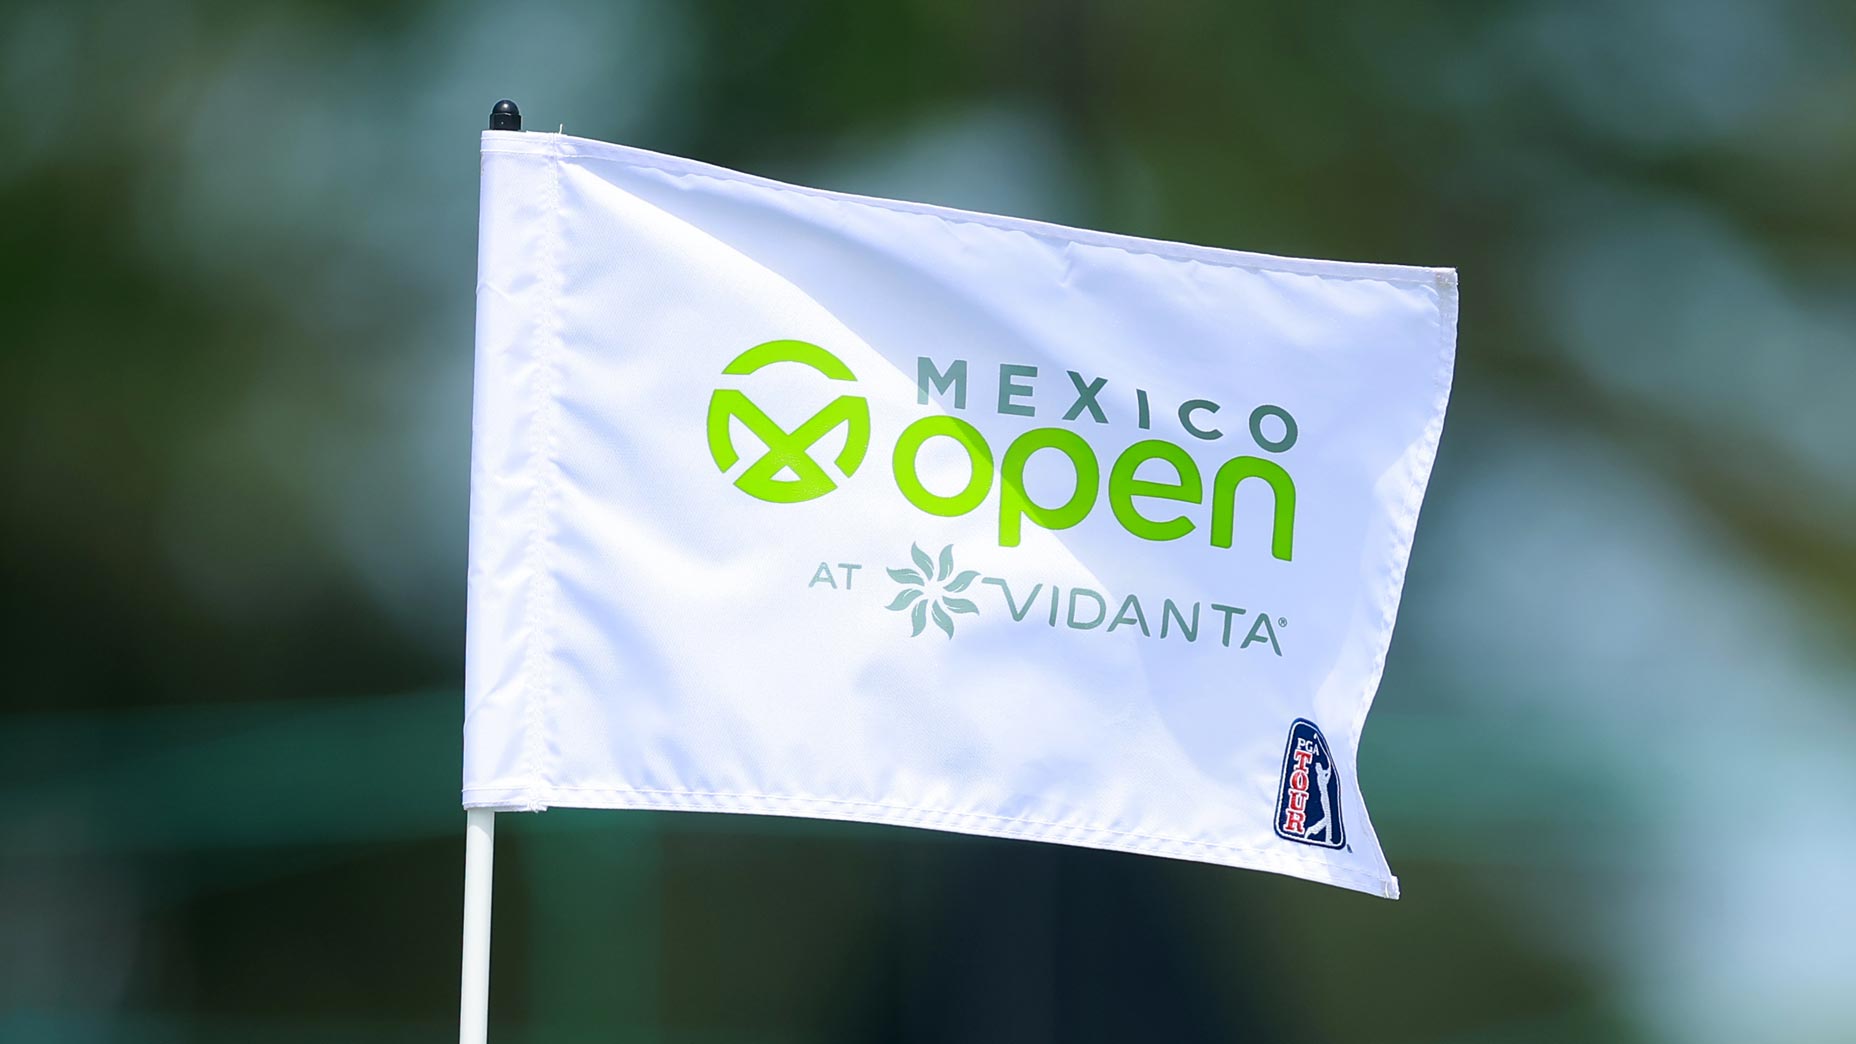 Mexico Open flag seen on course during tournament